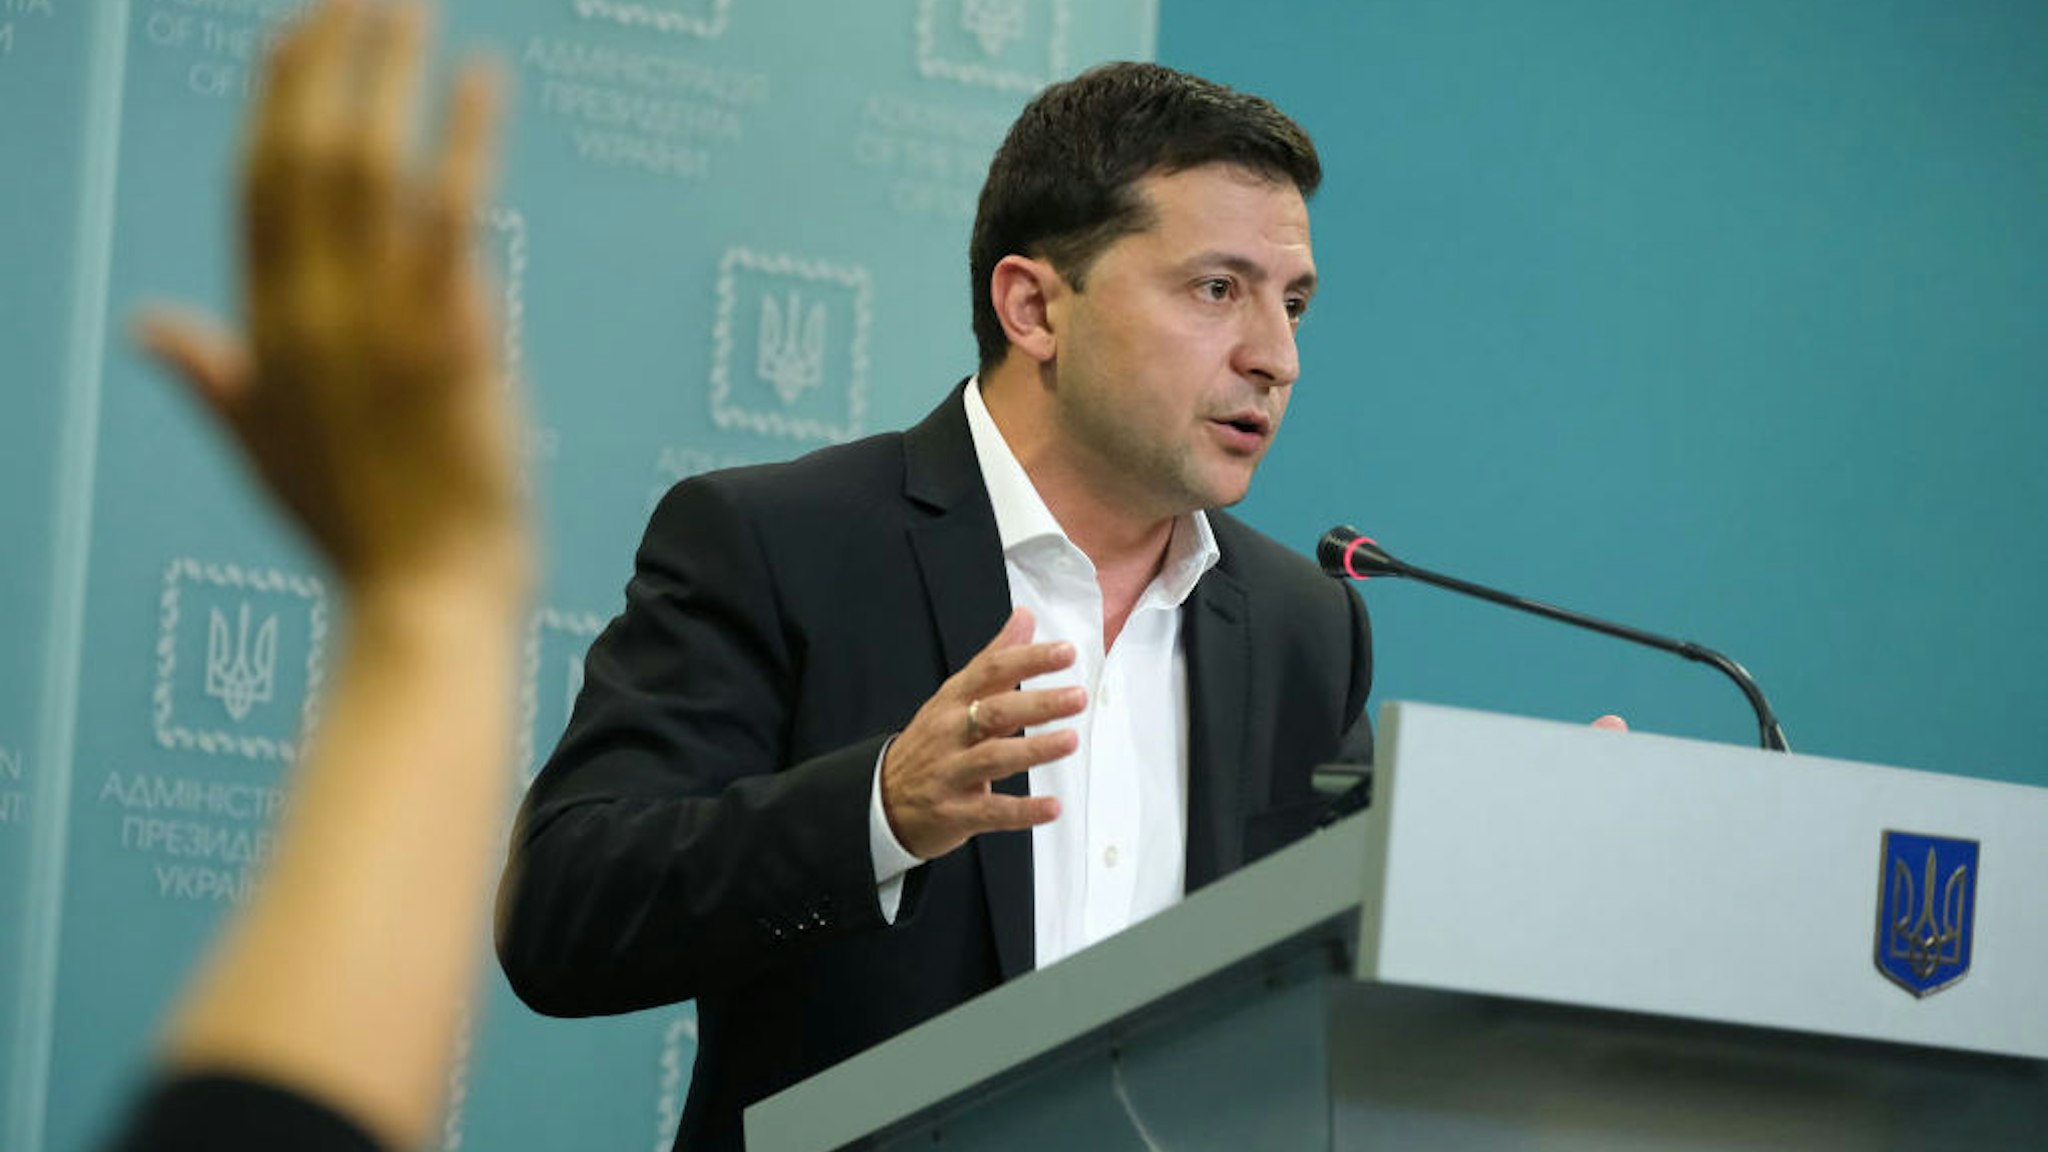 Ukrainian President Volodymyr Zelensky speaks to the media on October 1, 2019 in Kiev, Ukraine. Ukraine has been at the core of a political storm in U.S. politics since the release of a whistleblower's complaint suggesting U.S. President Donald Trump, at the expense of U.S. foreign policy, pressured Ukraine to investigate Trump's rival, Joe Biden, and Biden's son, Hunter. (Photo by Sean Gallup/Getty Images)